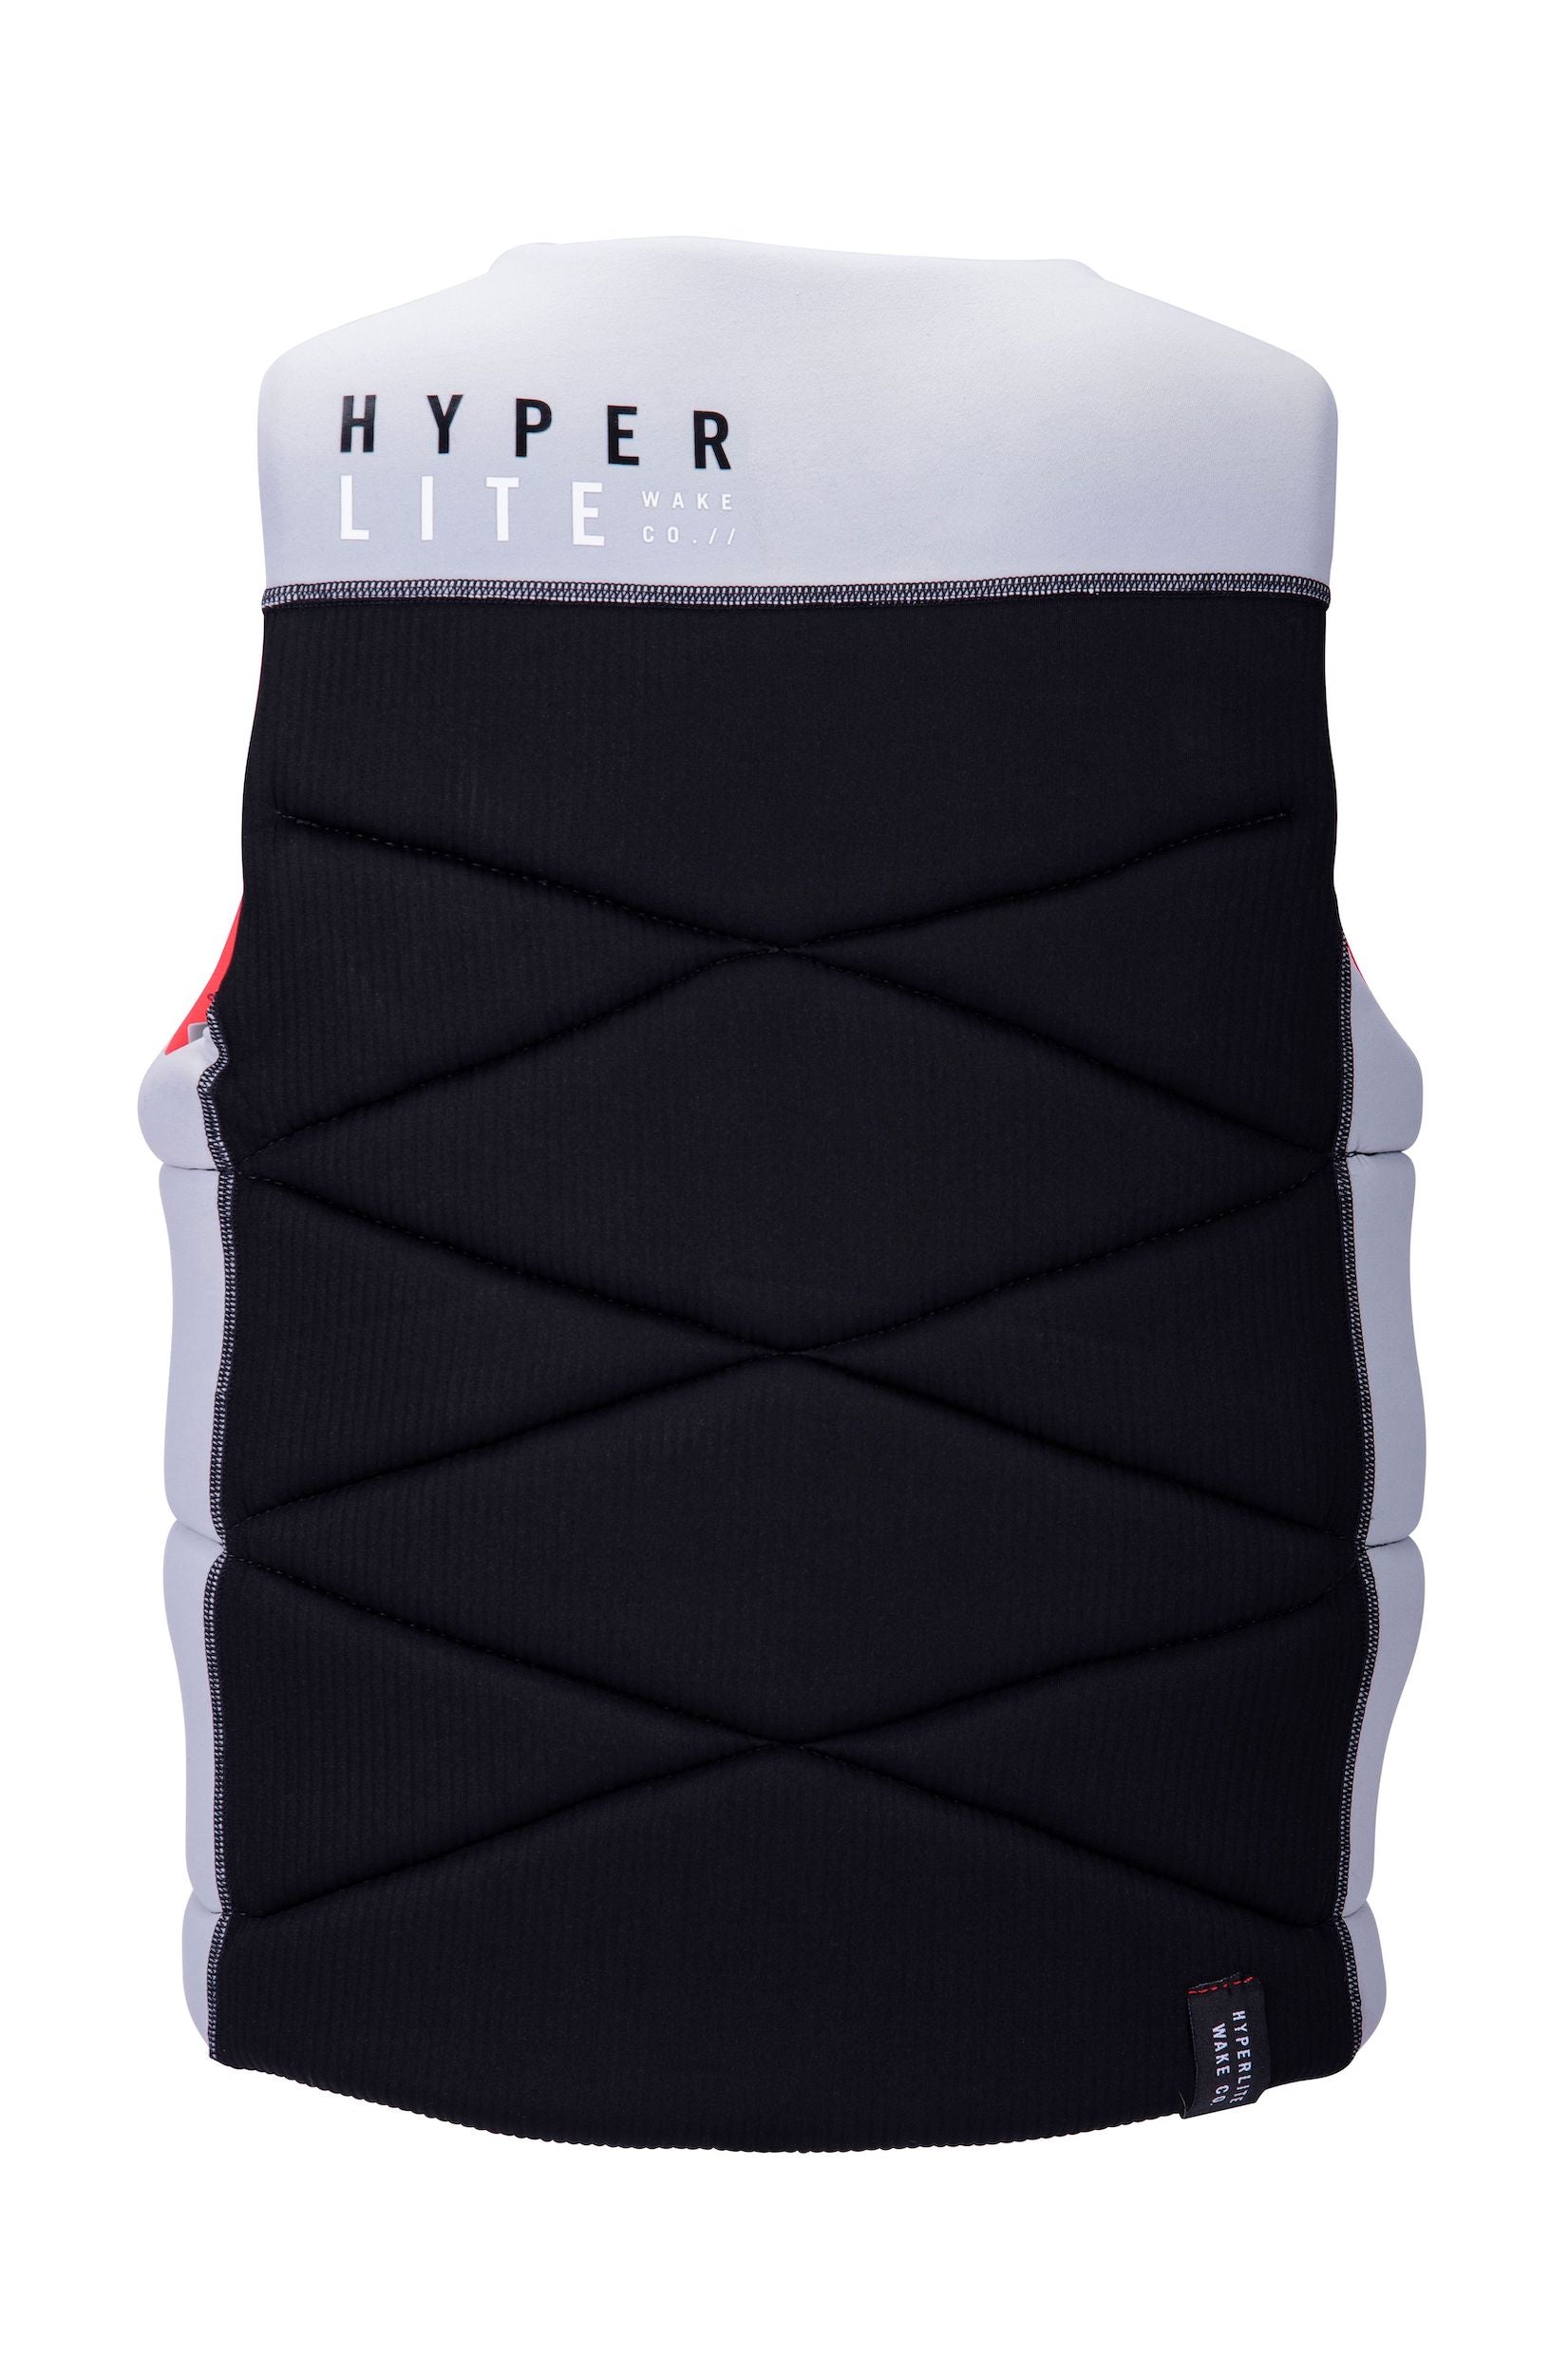 A Hyperlite 2024 NCGA Riot Vest, a lightweight life vest jacket that provides exceptional protection, adorned with the words "hyper life" in a black and white design.